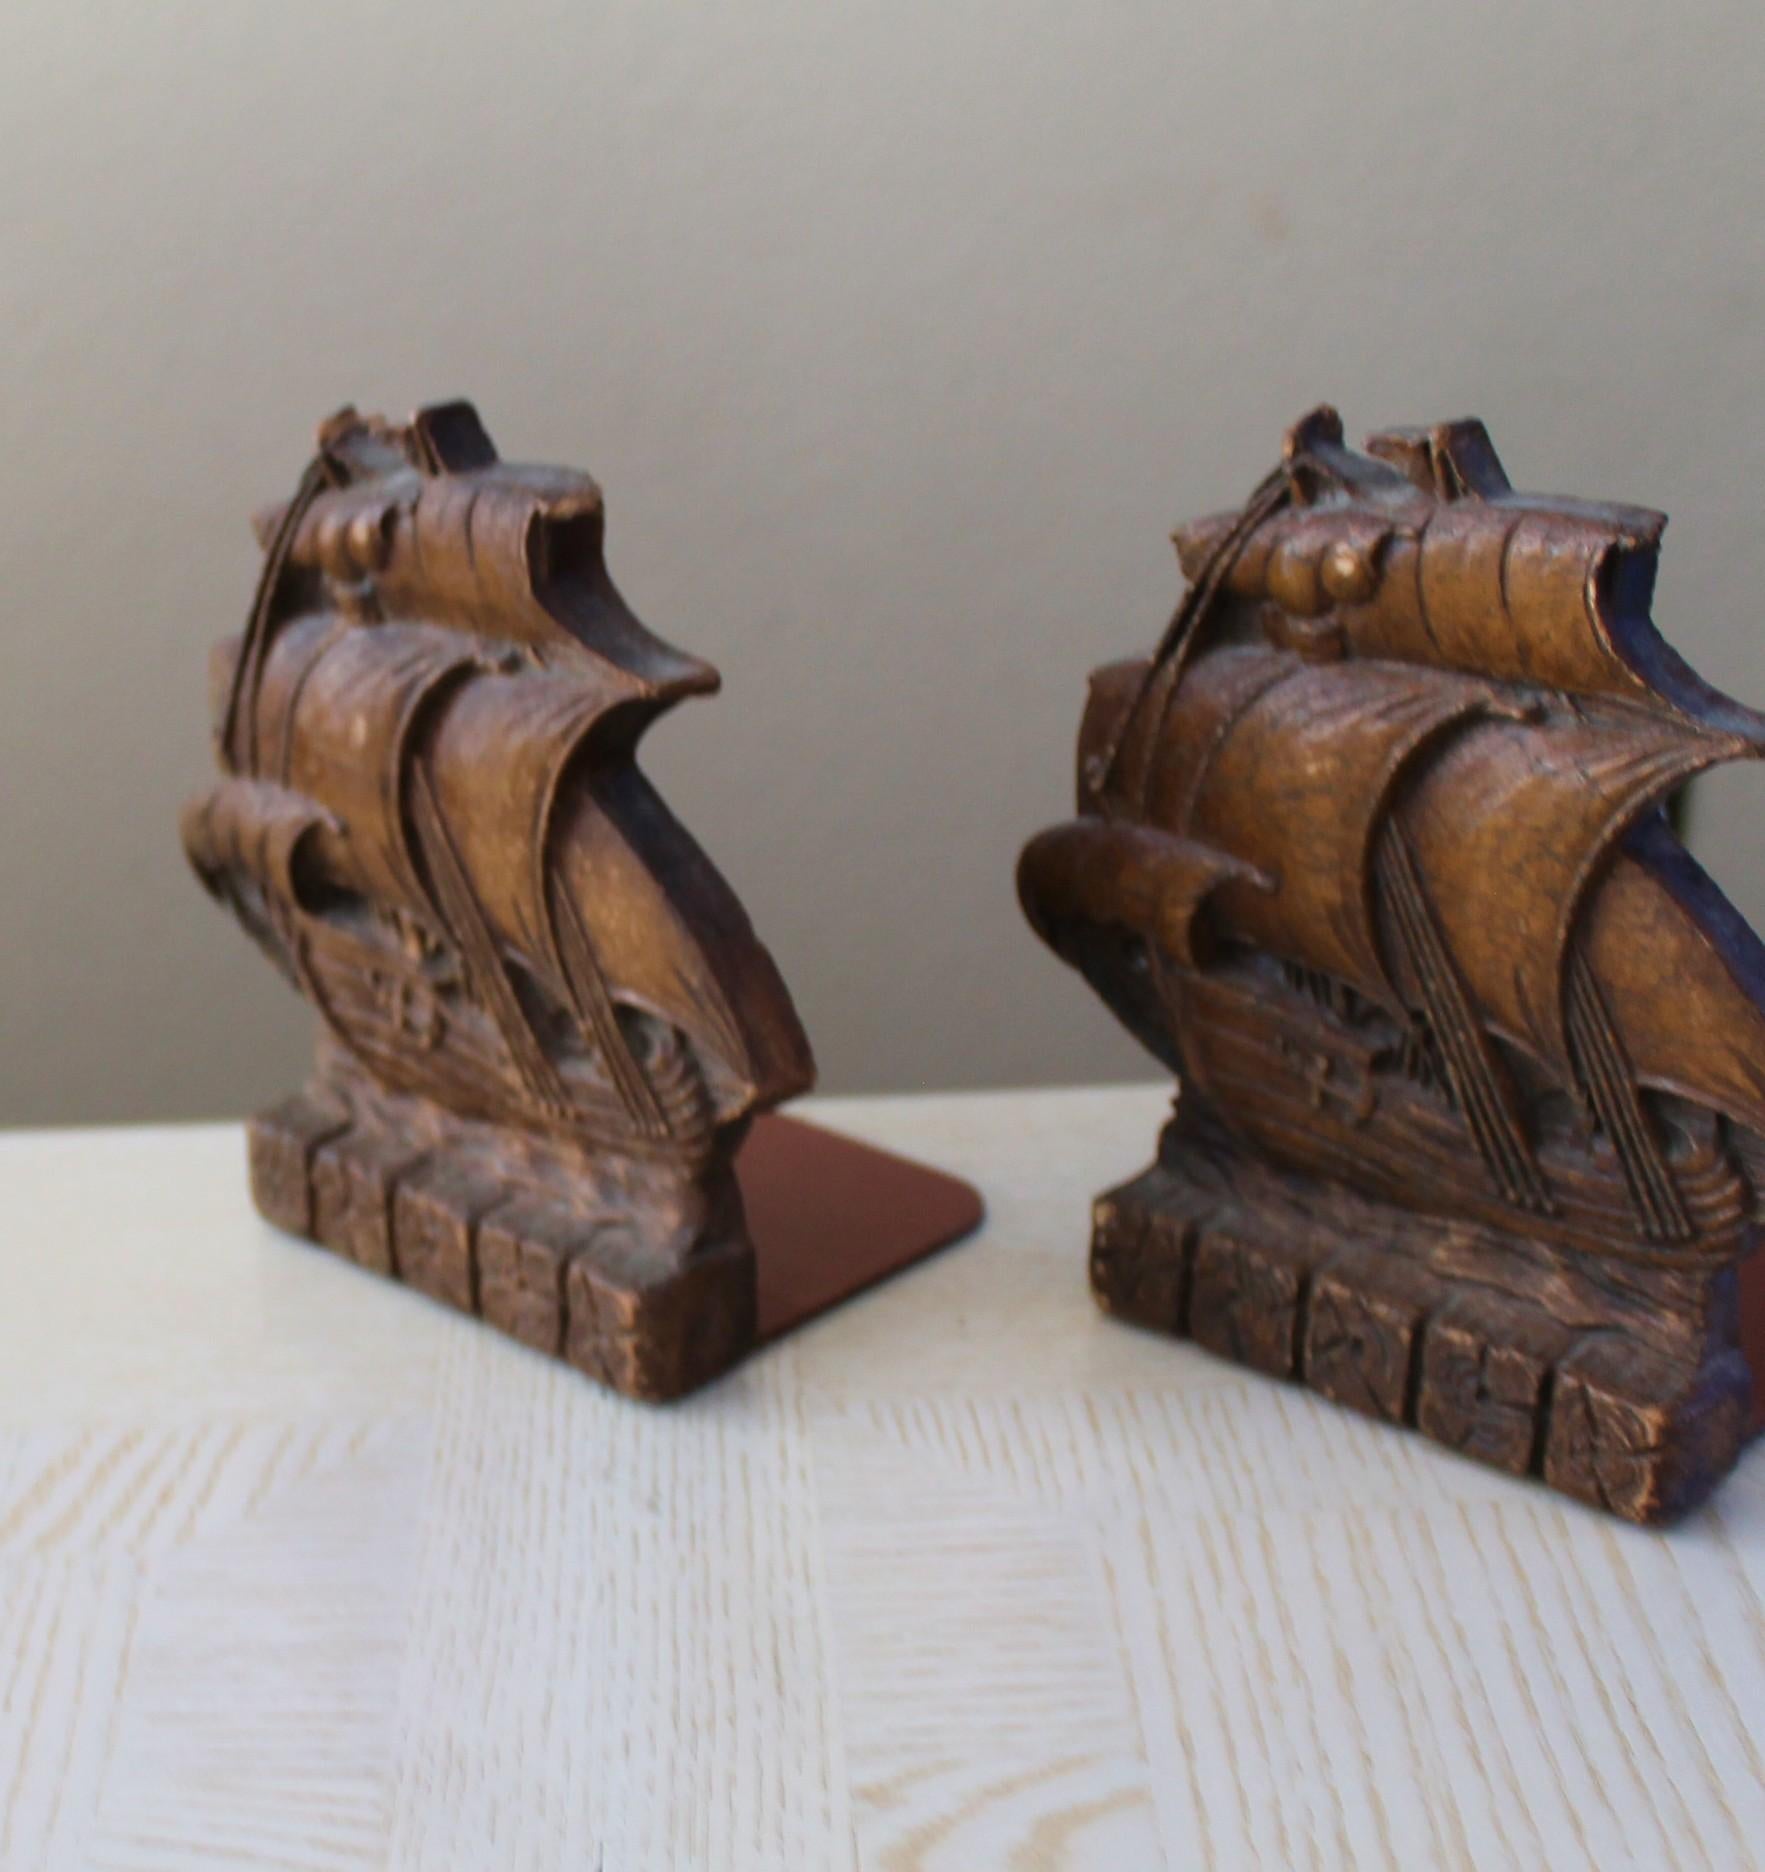 1920s Beautiful Pair Galleon Ship Bookends  Early Synthetic Plastics Shelf Decor In Good Condition For Sale In Peoria, AZ